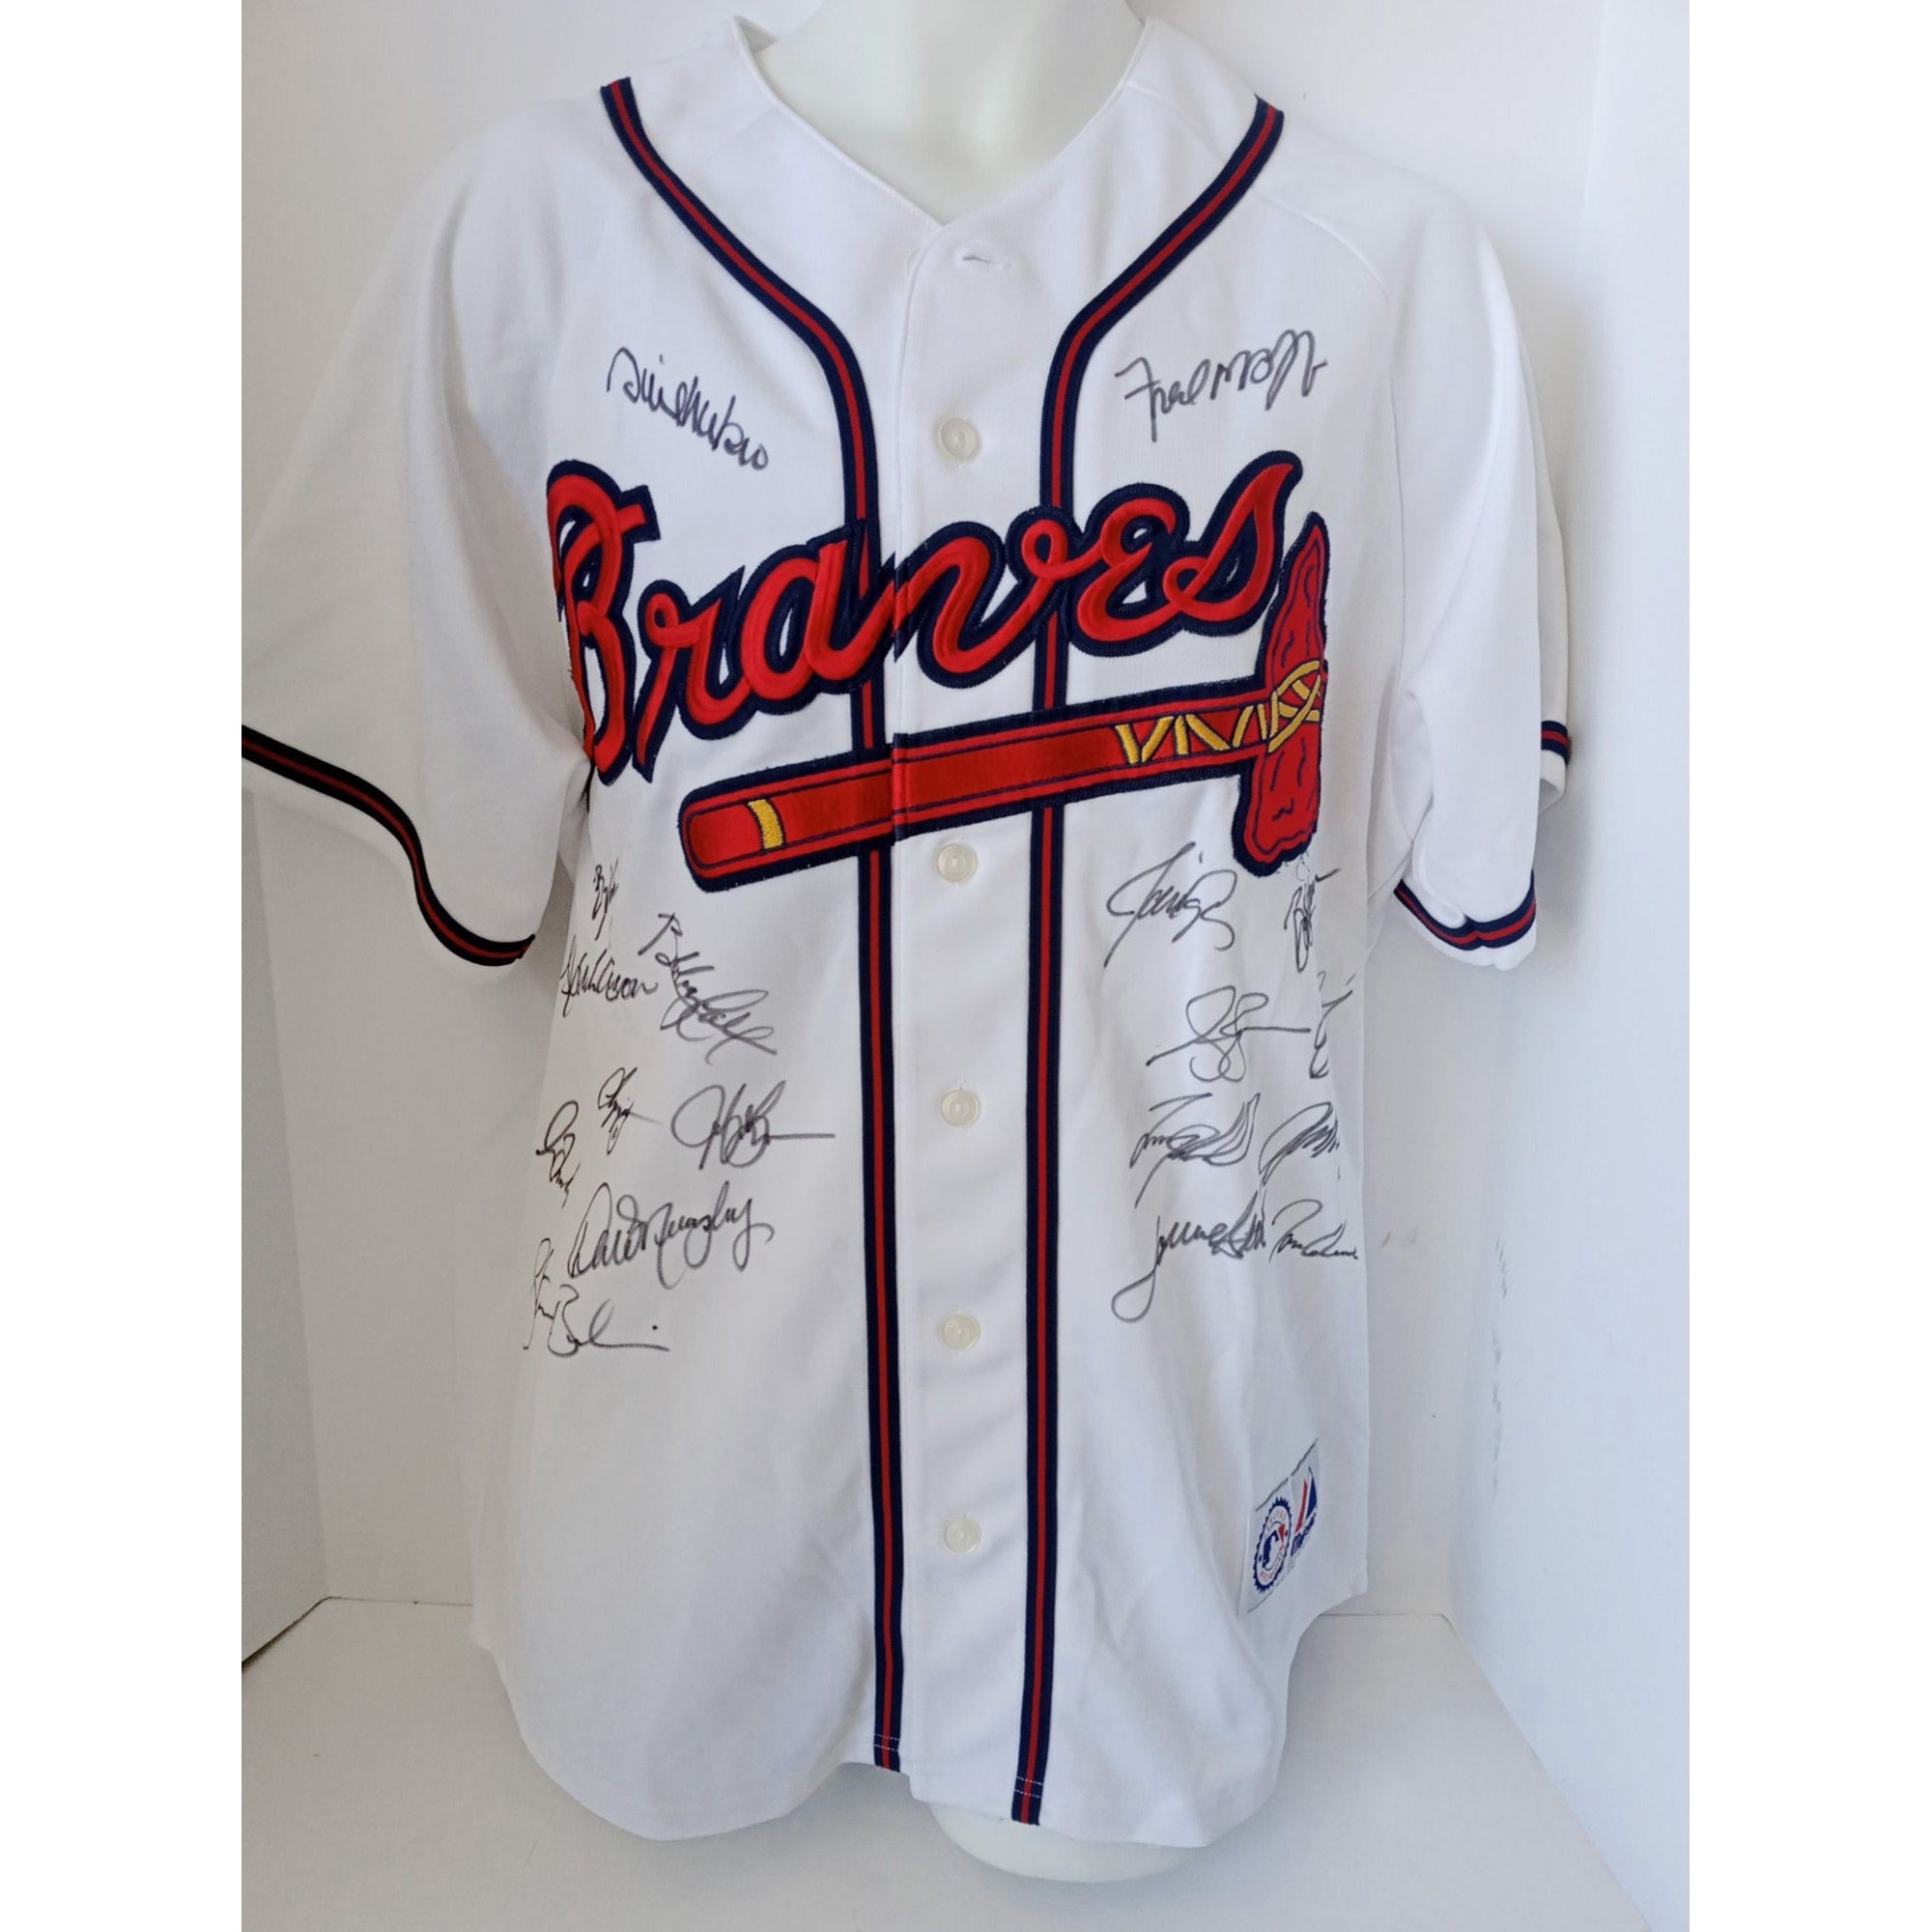 Atlanta Braves Greg Maddox, Chipper Jones, Hank Aaron all-time greats signed jersey with proof